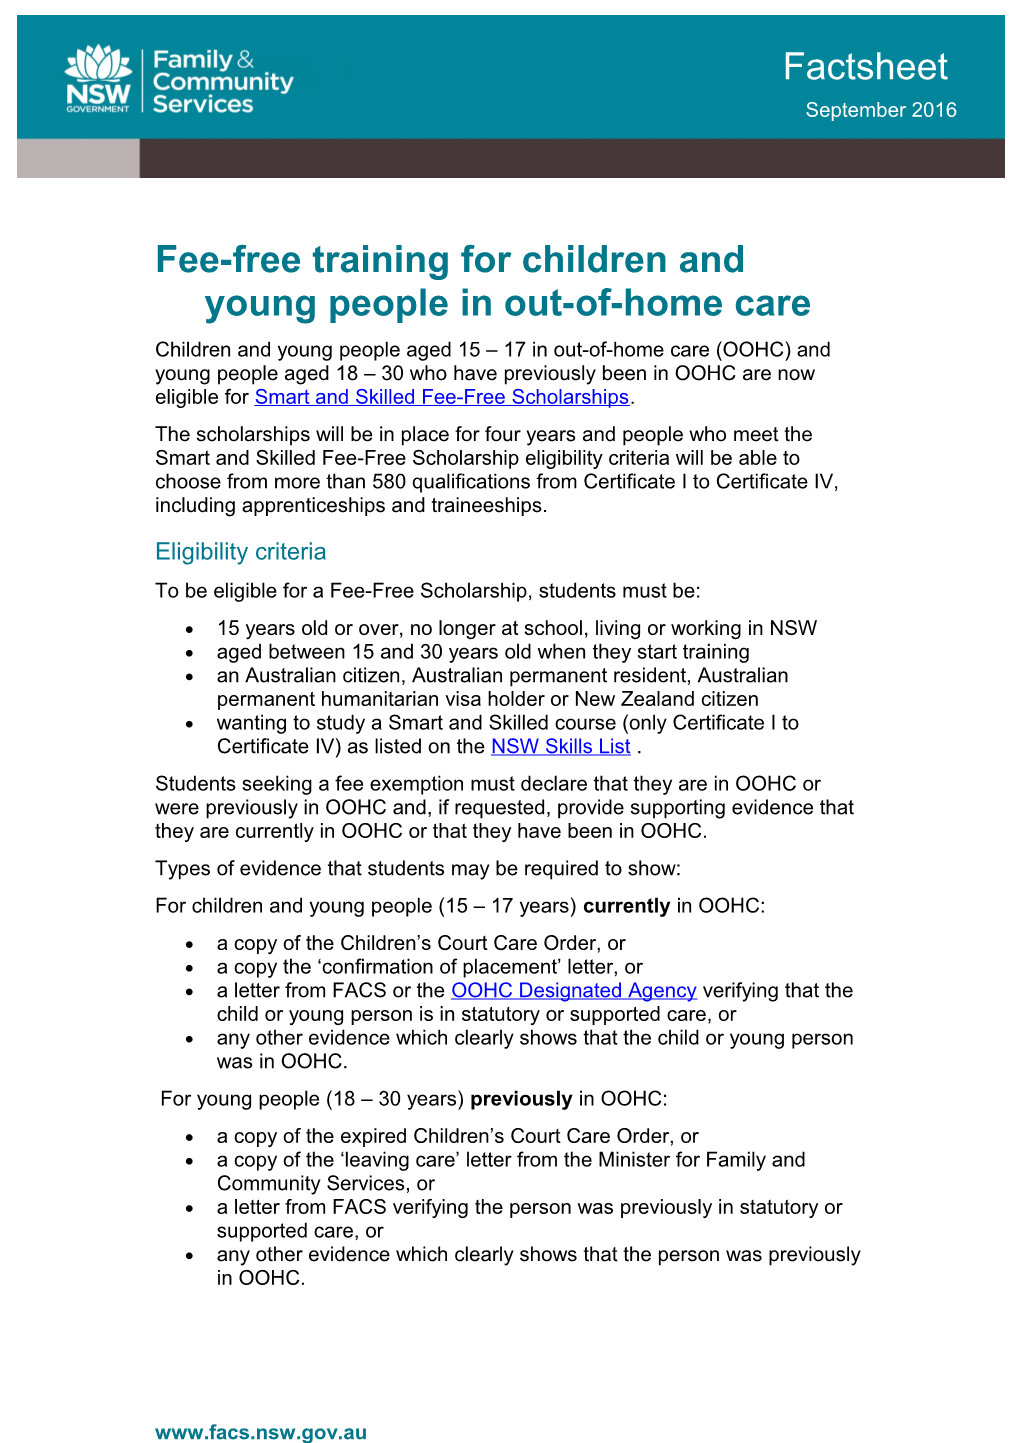 Fee-Free Training for Children and Young People in Out-Of-Home Care